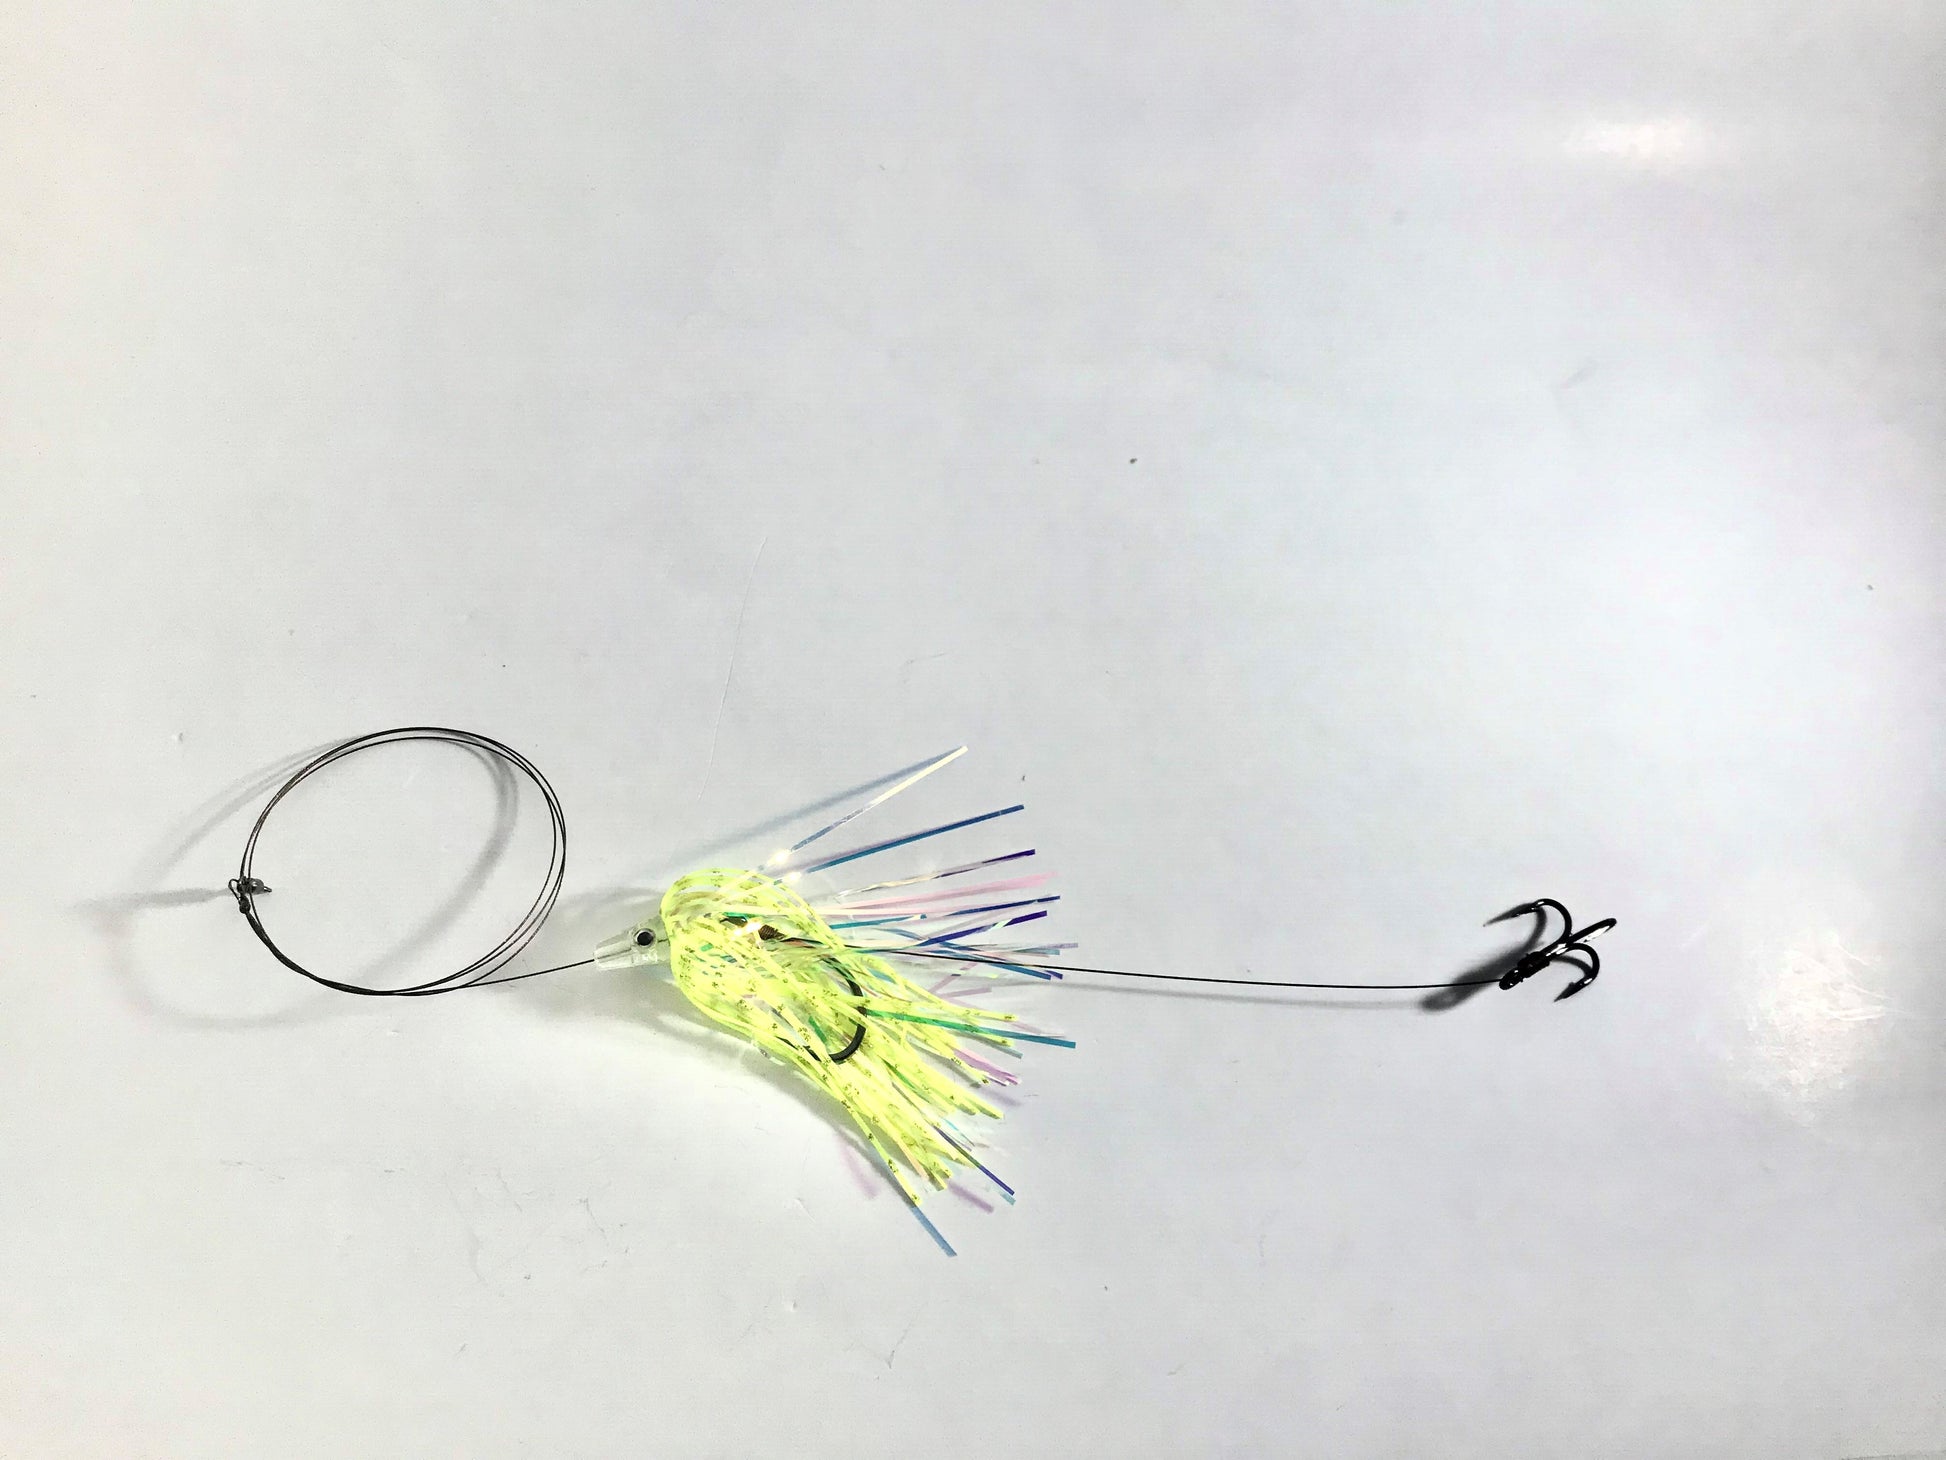 DF Kingfish Rigs (Skirted Cable)